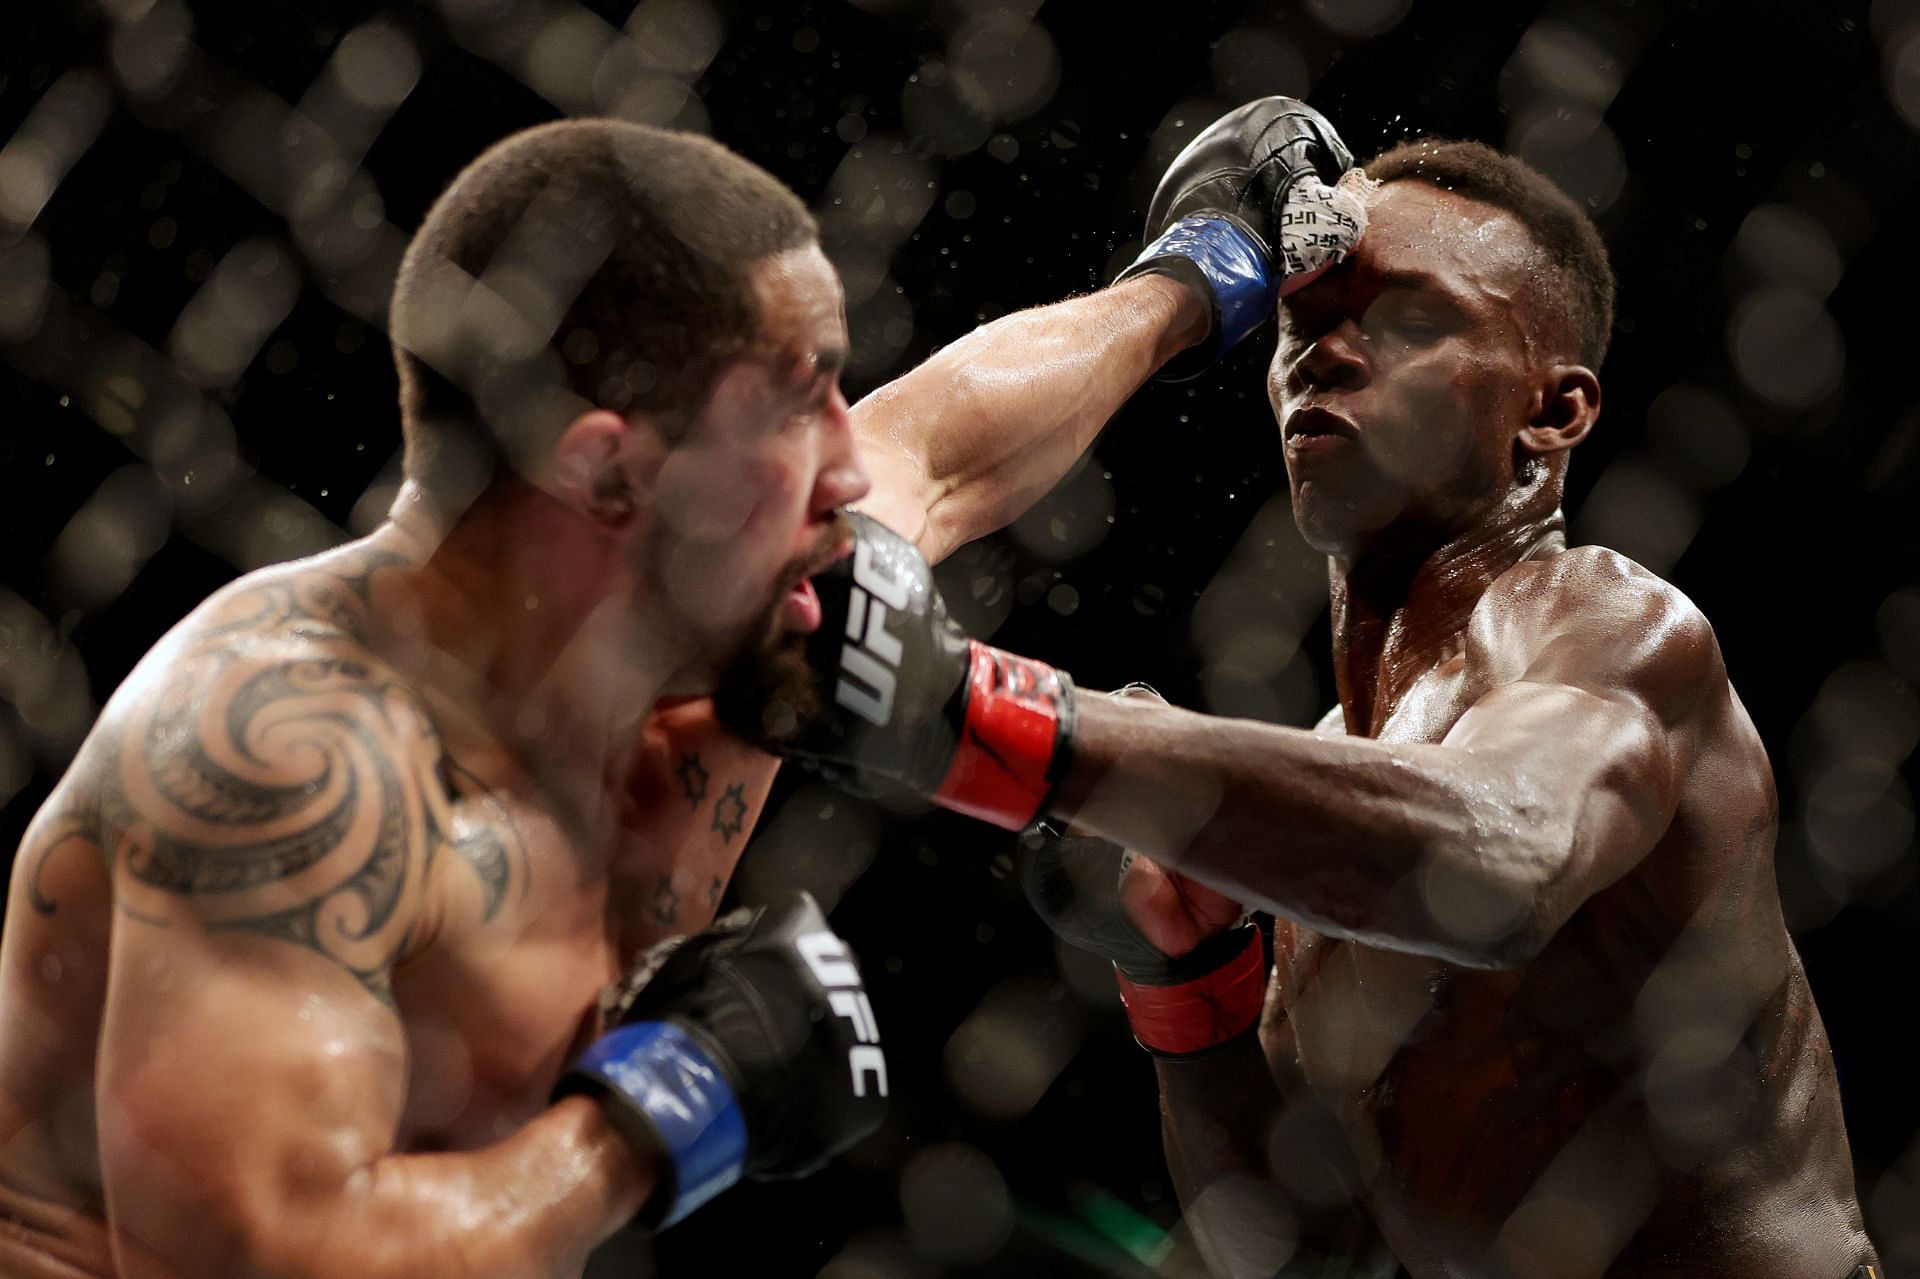 Israel Adesanya defeated Robert Whittaker via unanimous decision in their rematch